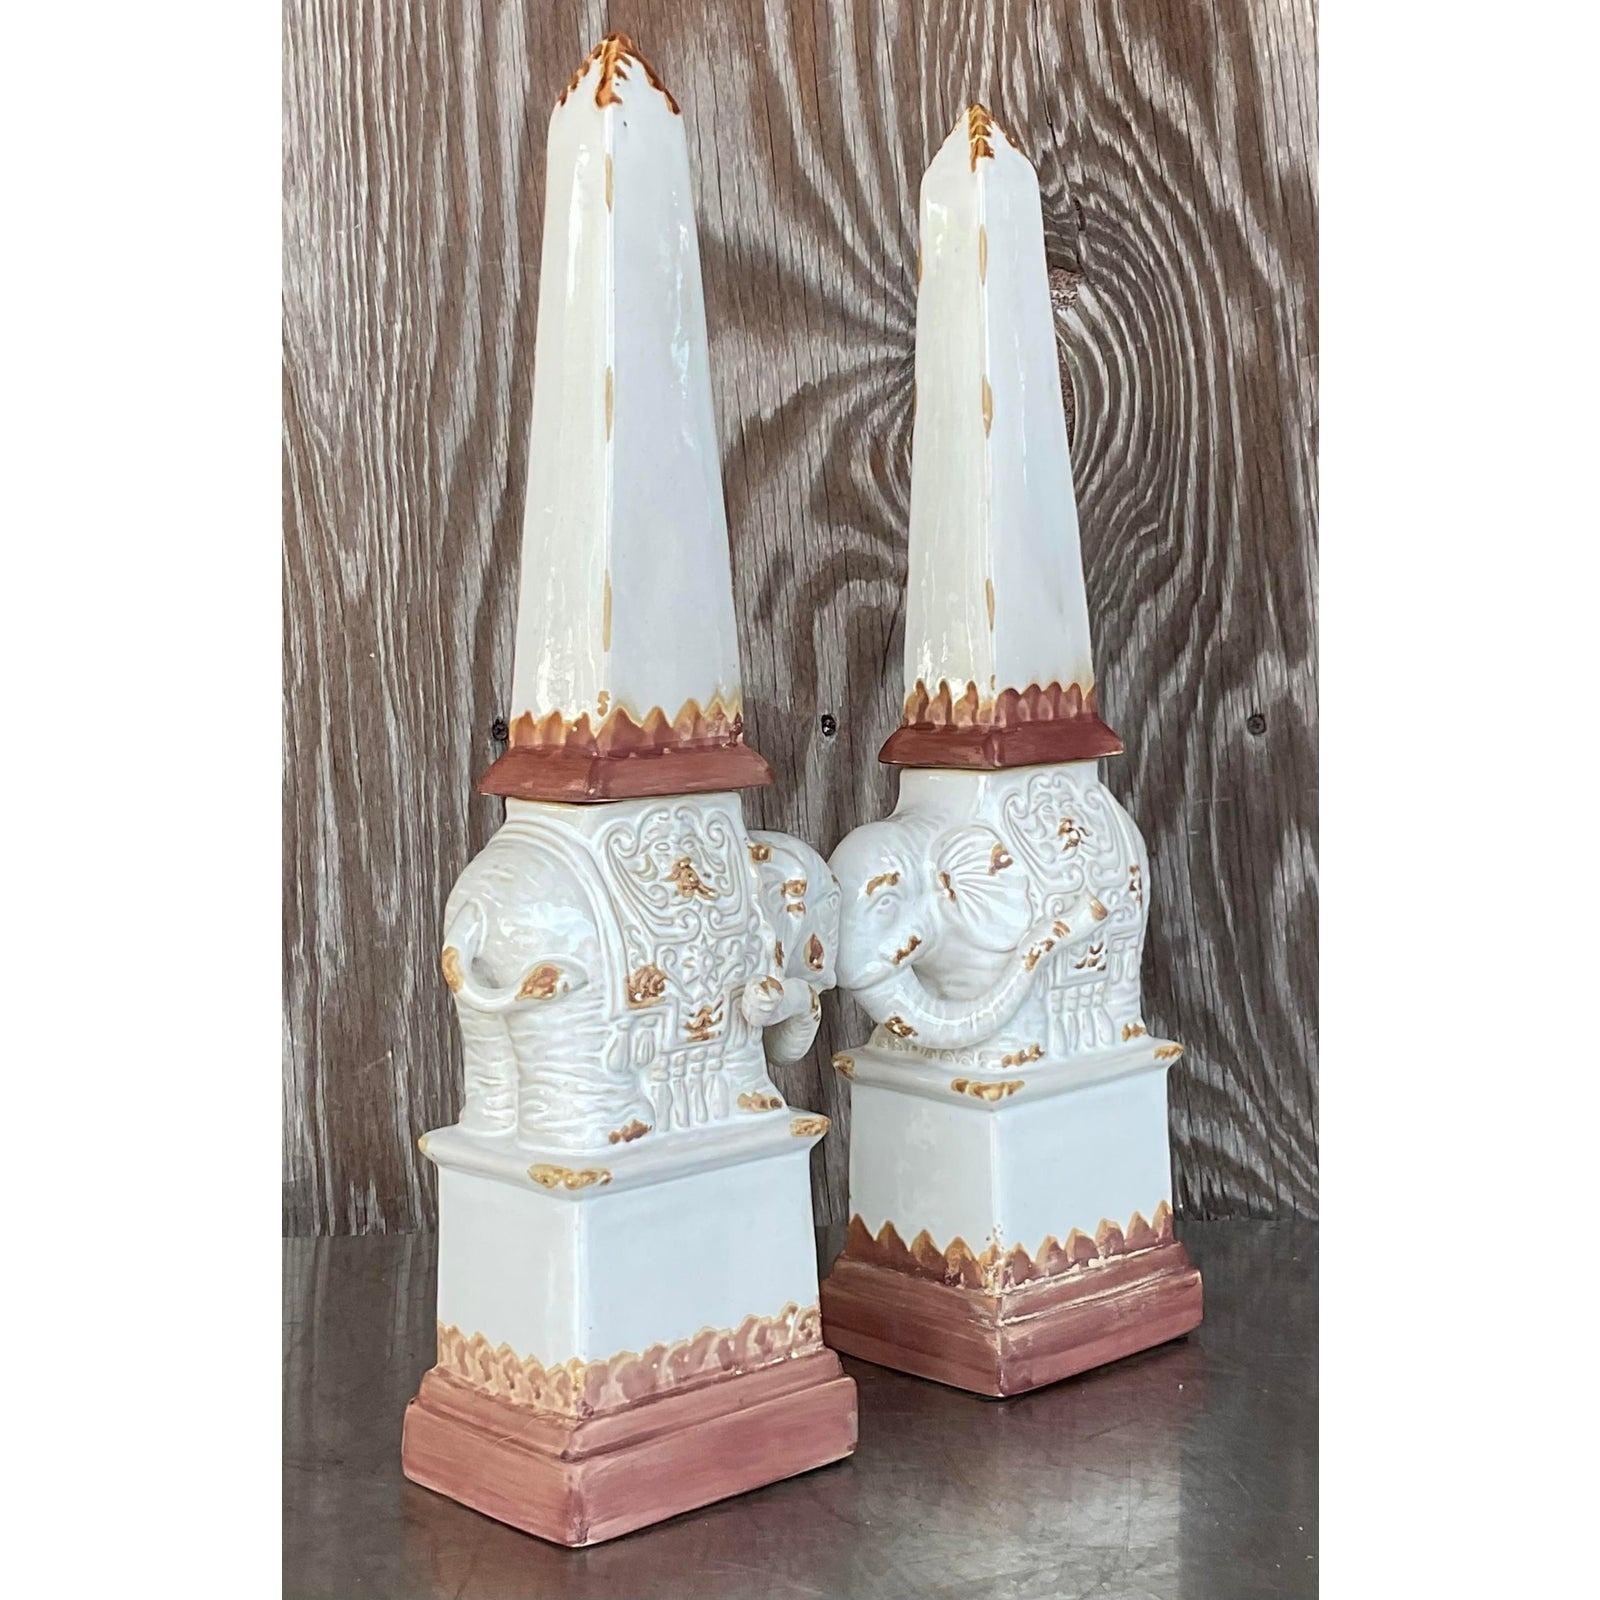 A stunning pair of vintage glazed terra cotta obelisks. A fun elephant design with trunks up for good luck. Acquired from a Palm Beach estate.